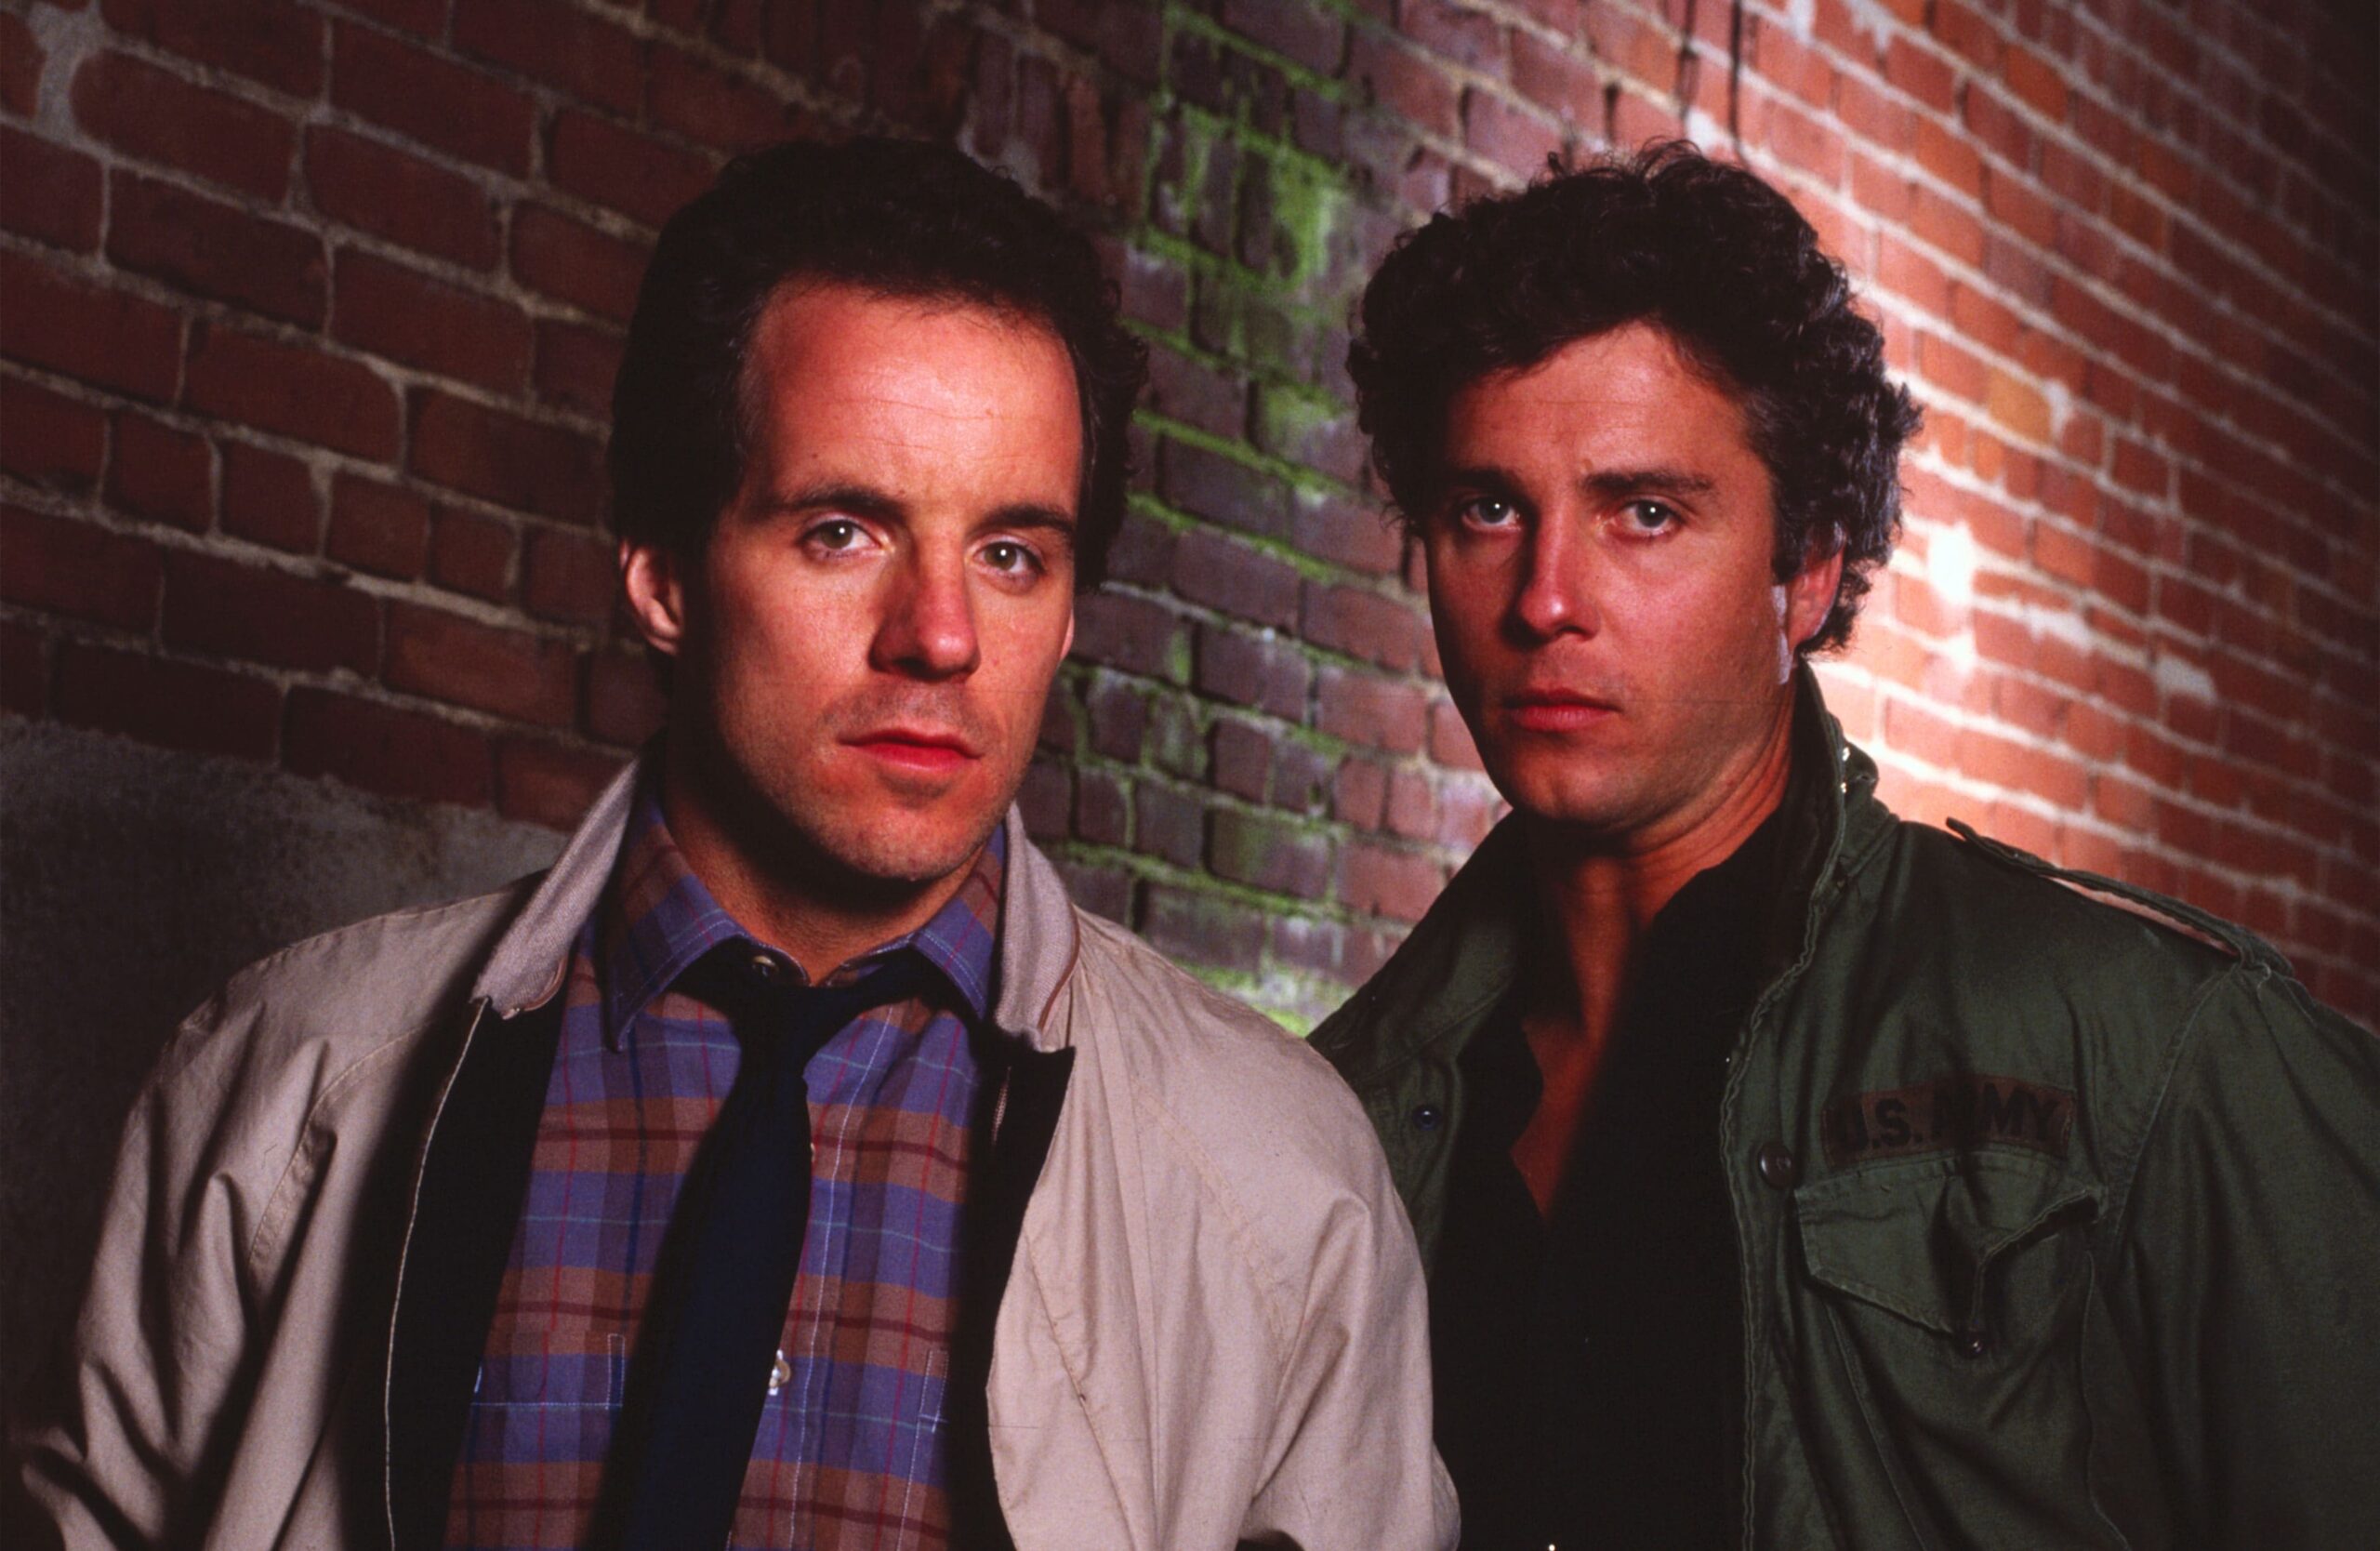 John Pankow and William Petersen in To Live and Die in L.A.